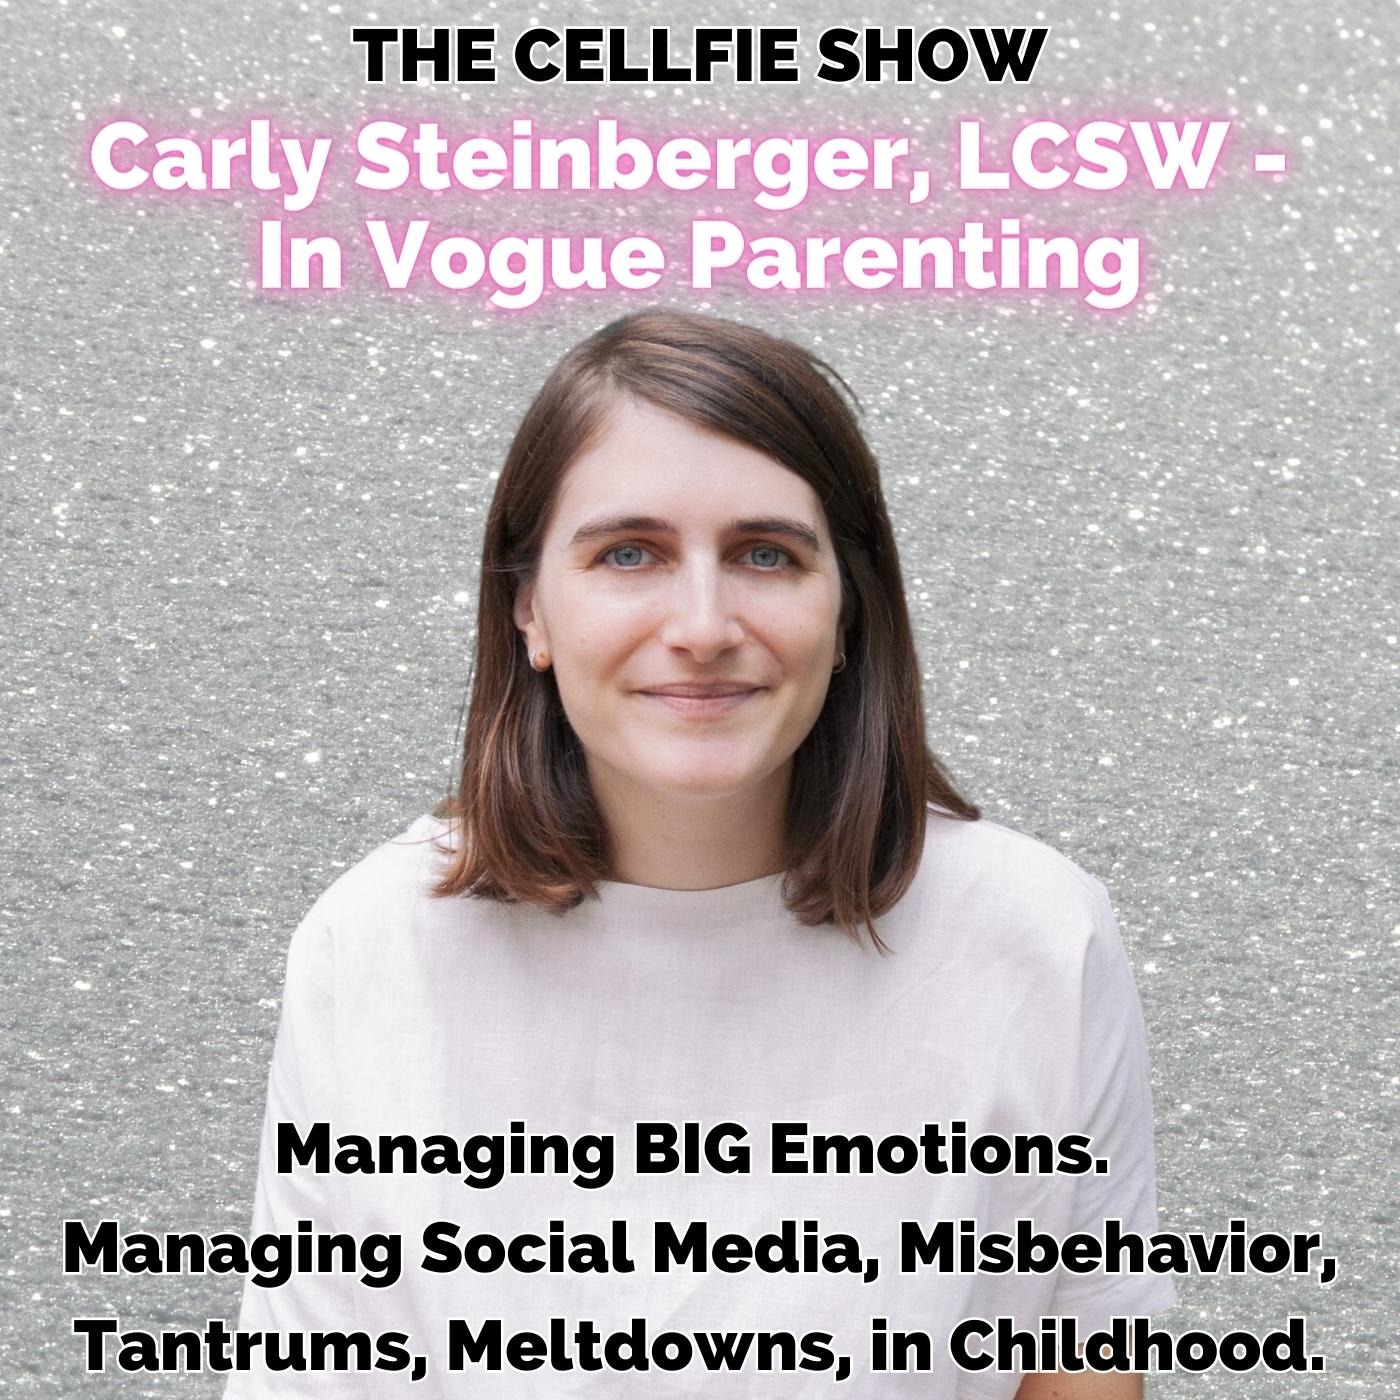 In Vogue Parenting with Carly Steinberger, LCSW. Managing BIG Emotions. Social Media, Misbehavior, Tantrums + Meltdowns in Childhood